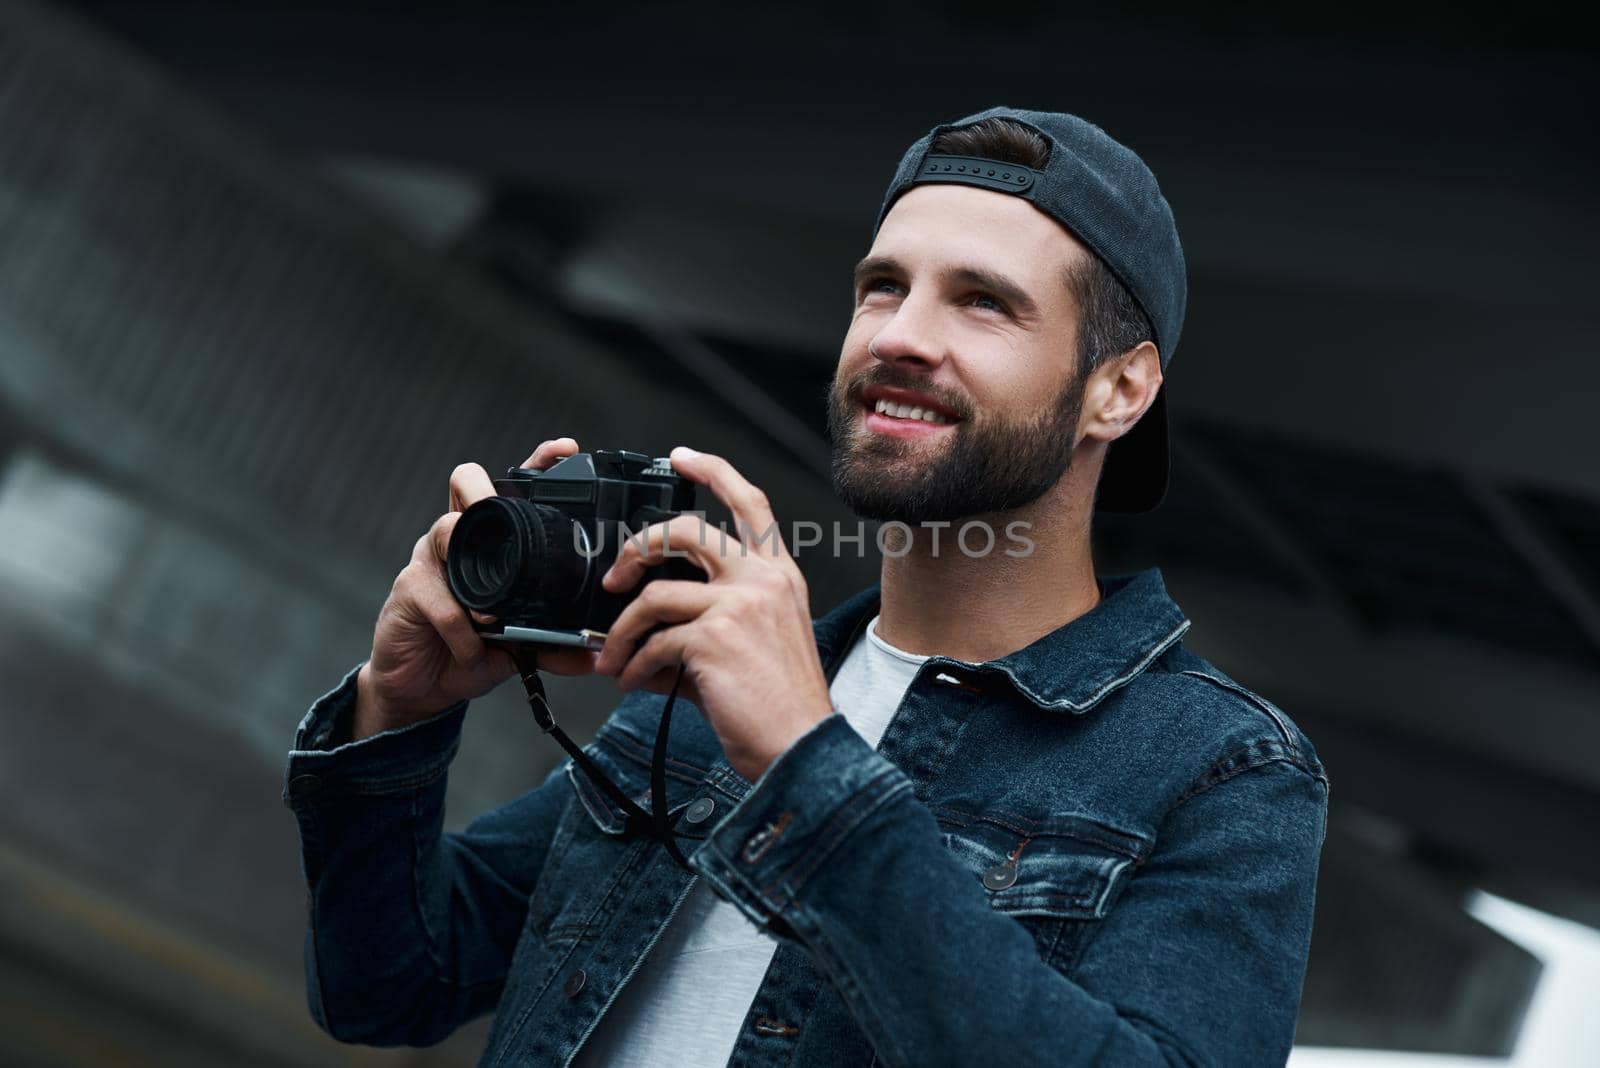 Photography hobby. Young stylish man standing on city street taking photos on camera looking forward smiling joyful close-up